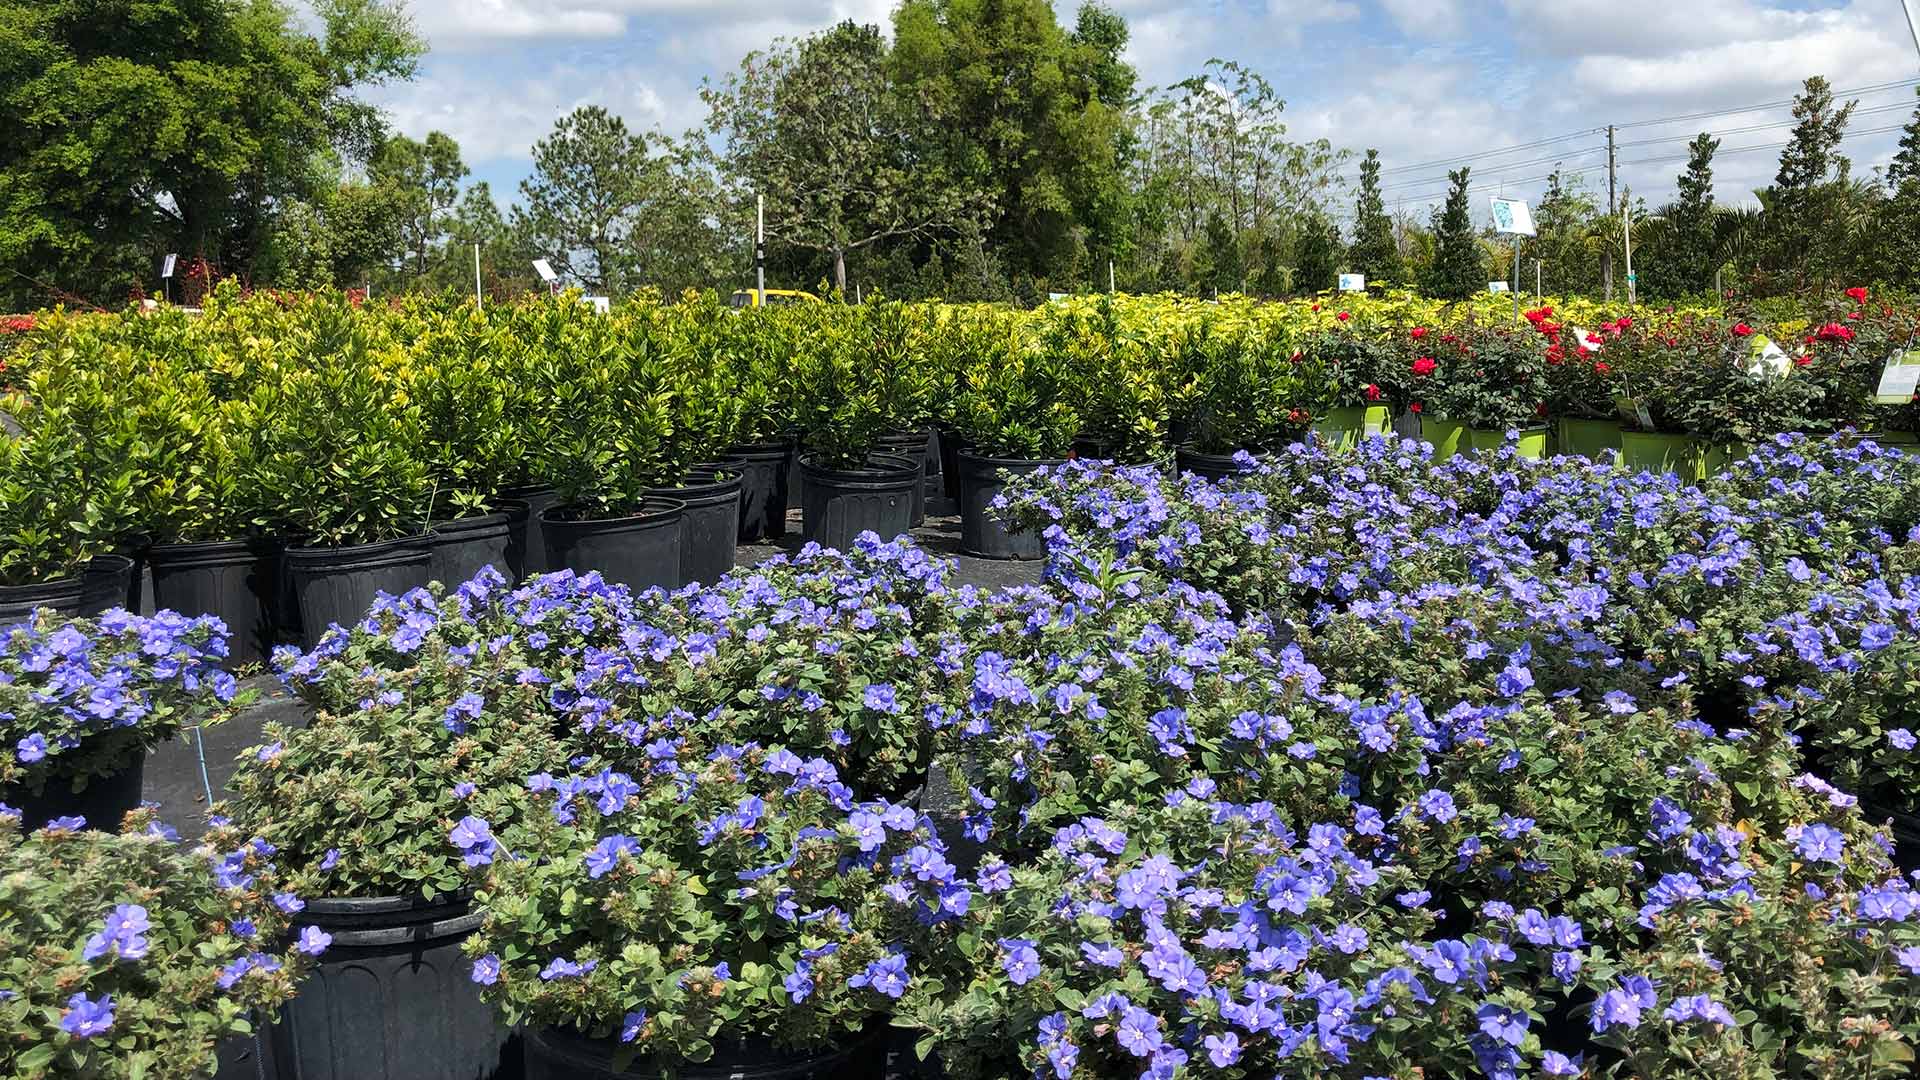 Wide selection of plants, trees, and flowers at our nursery in Gotha, FL.